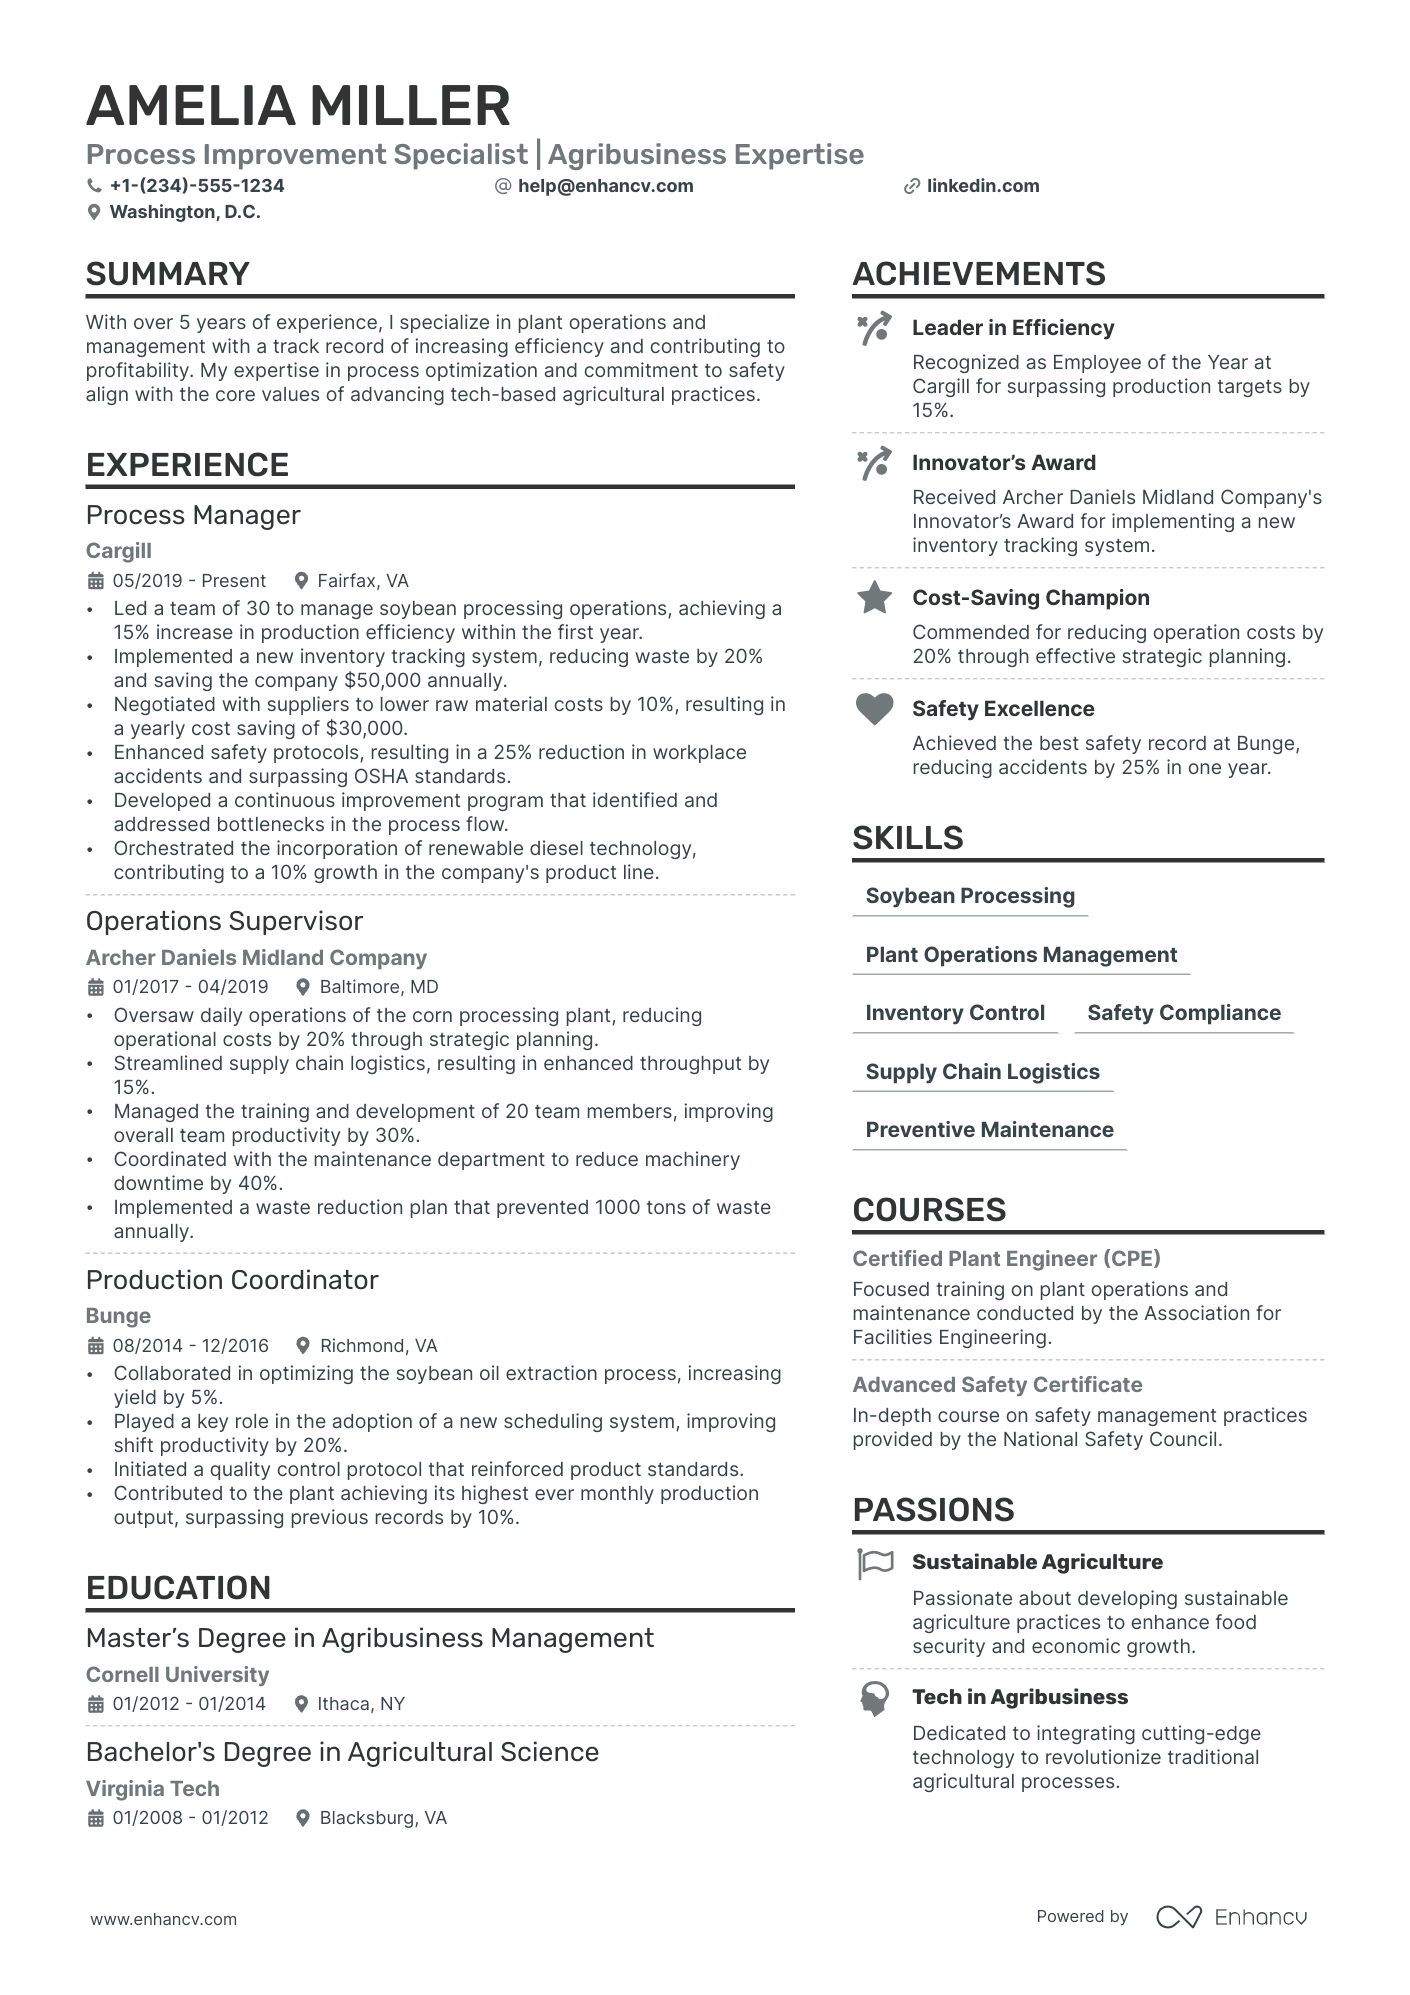 resume summary examples for restaurant management